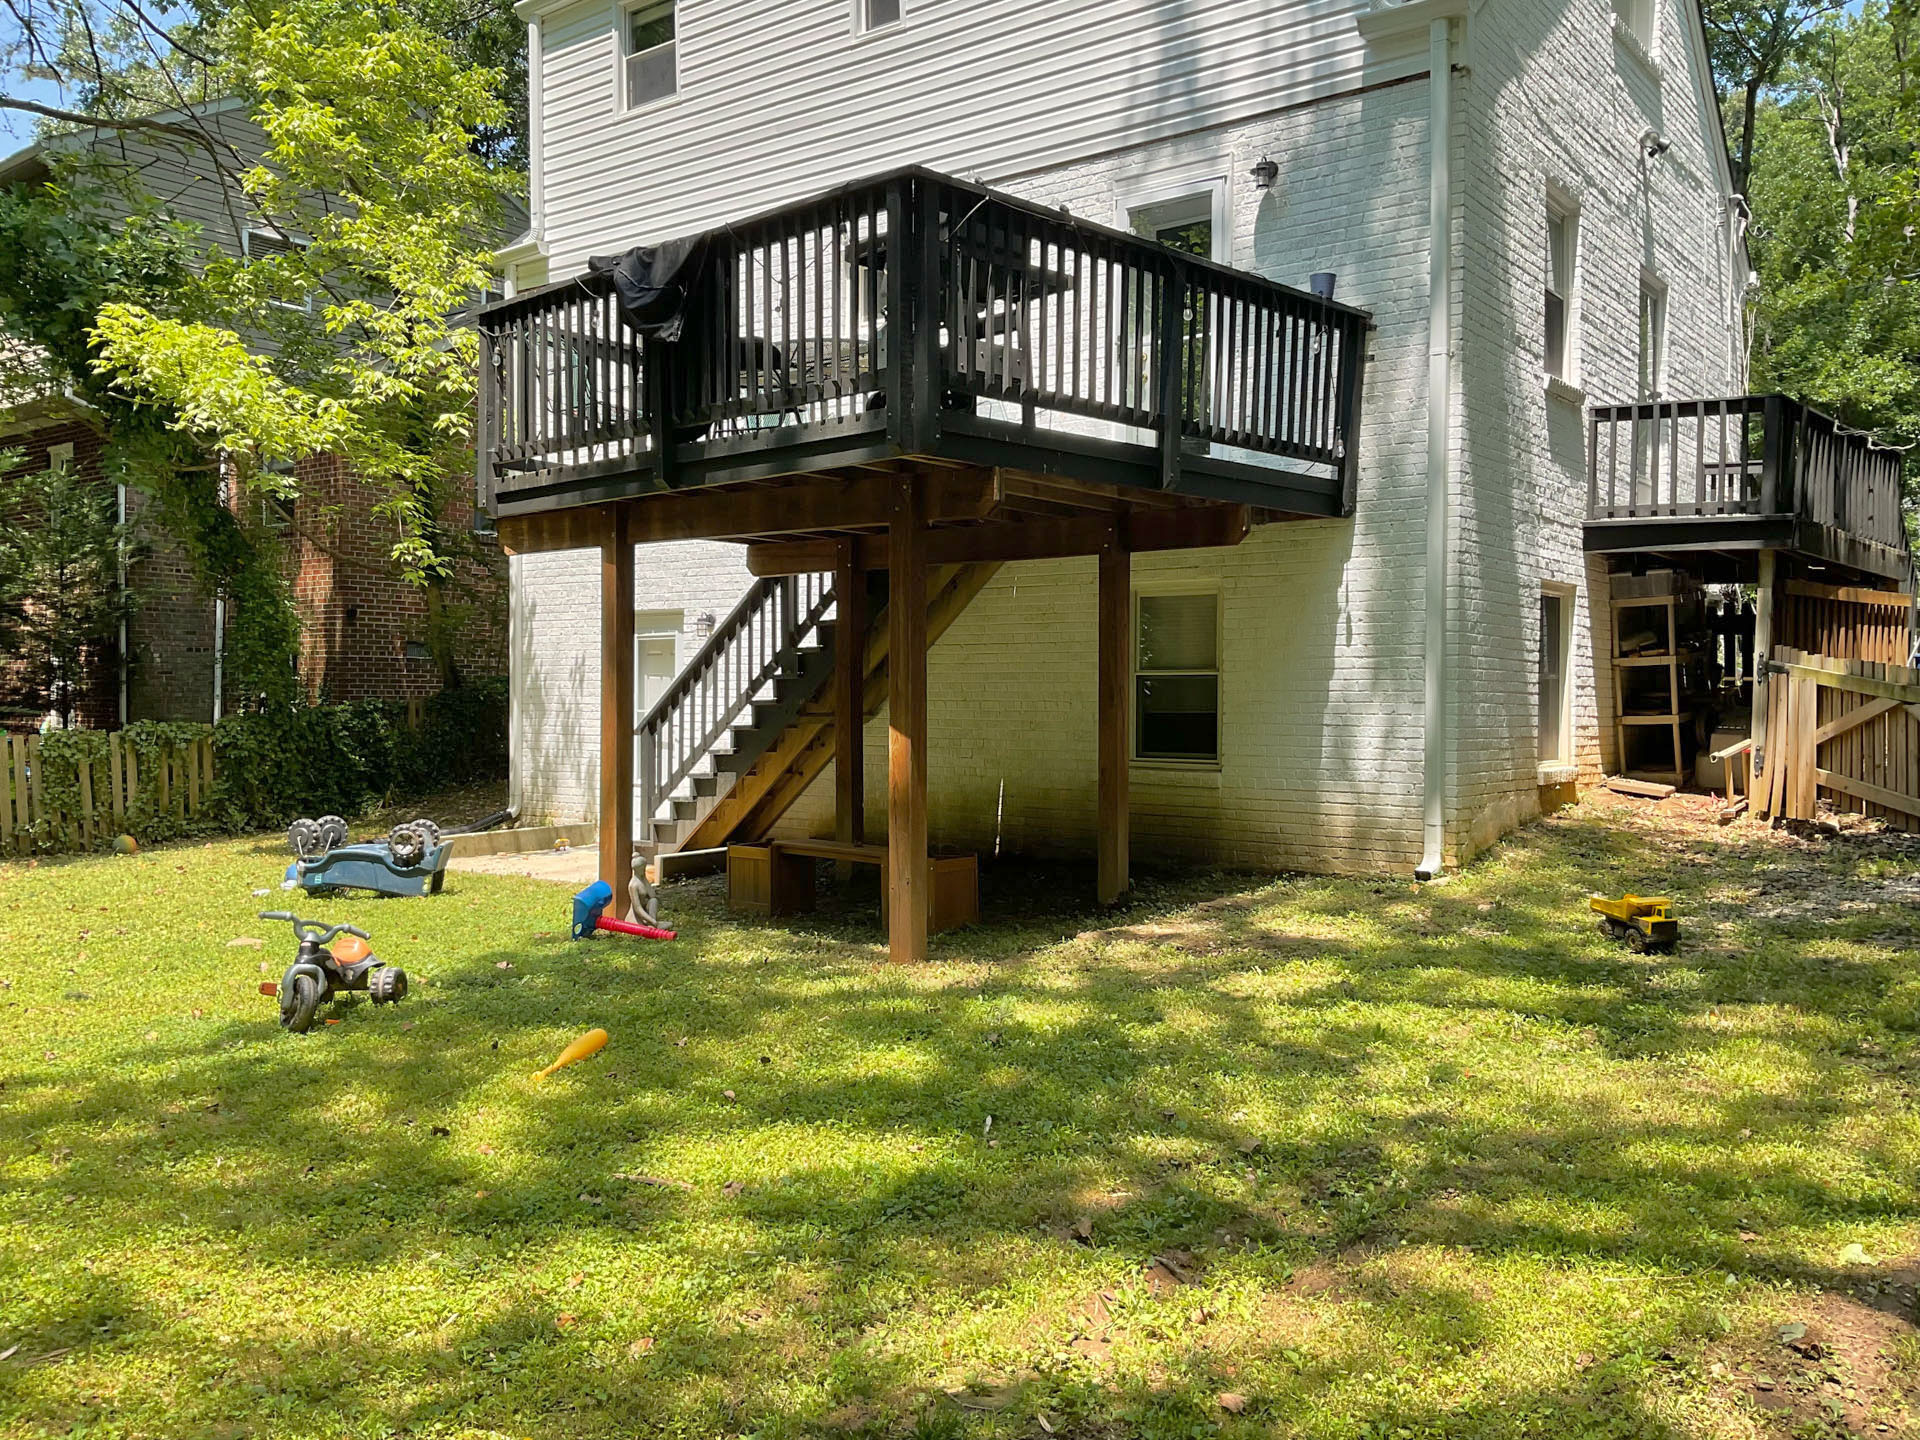 A backyard in Kensington MD before installation of a walkway and patio. Angle shows the backyard and rear deck.